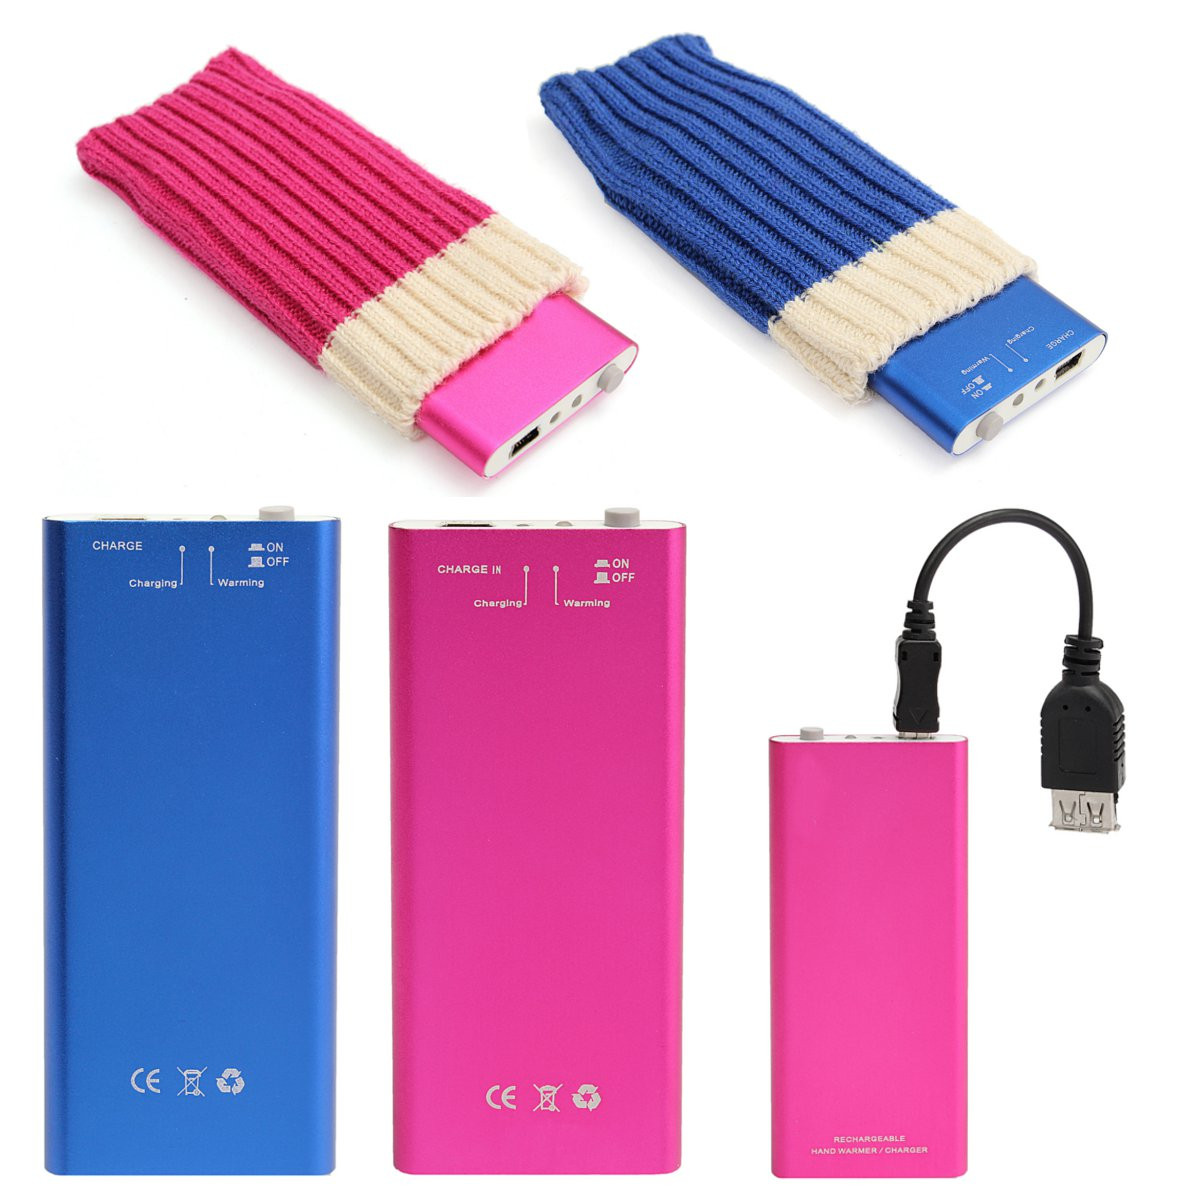 

1050mA Electric Heater Power Bank Portable USB Rechargeable Pocket Hand Warmer Support